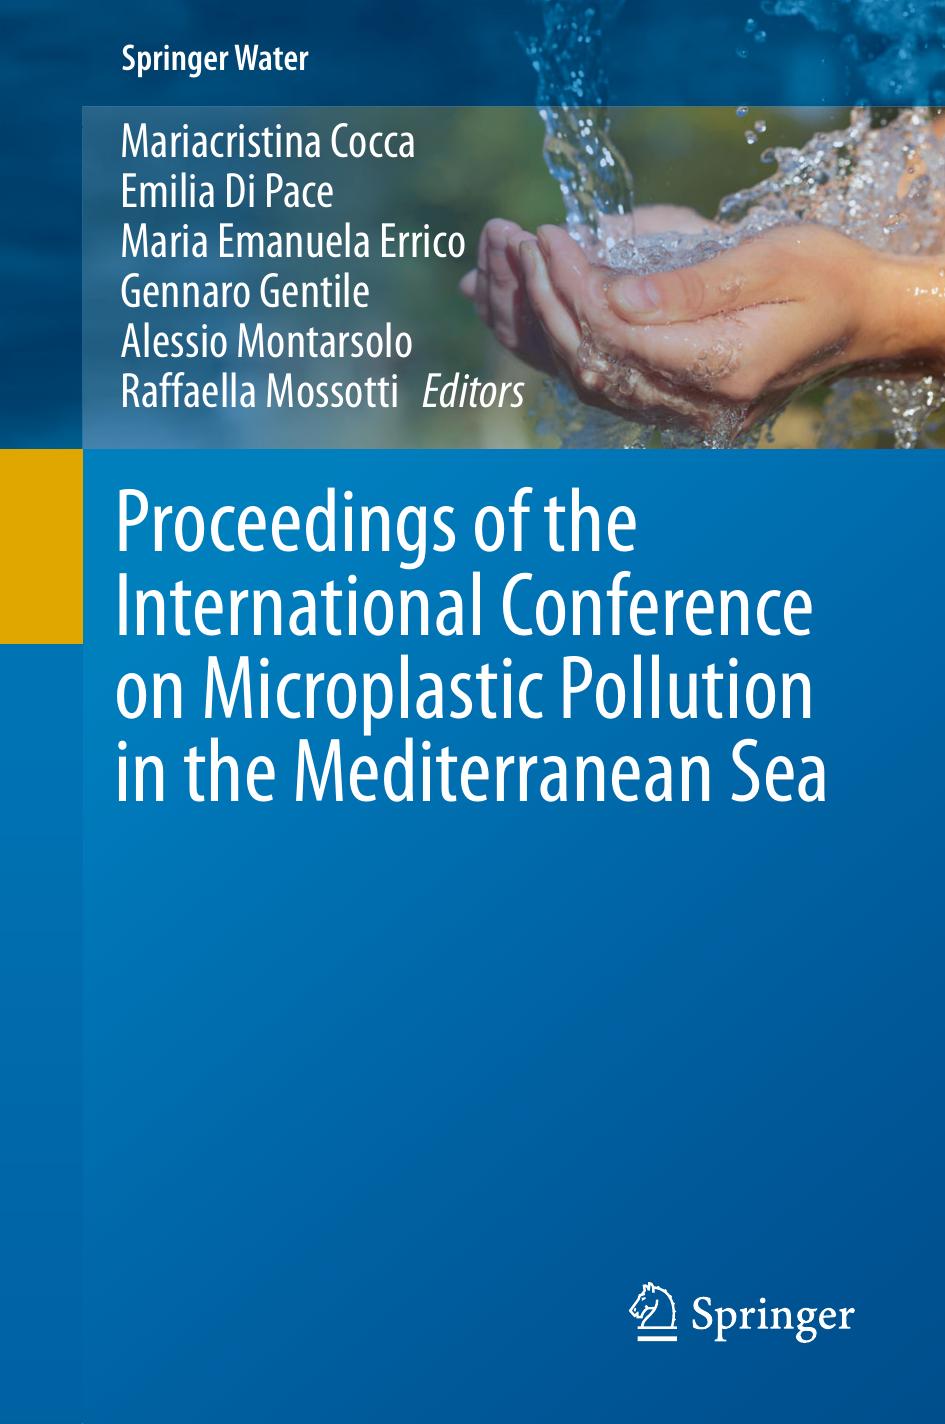 Proceedings of the International Conference on Microplastic Pollution in the Mediterranean Sea by unknow